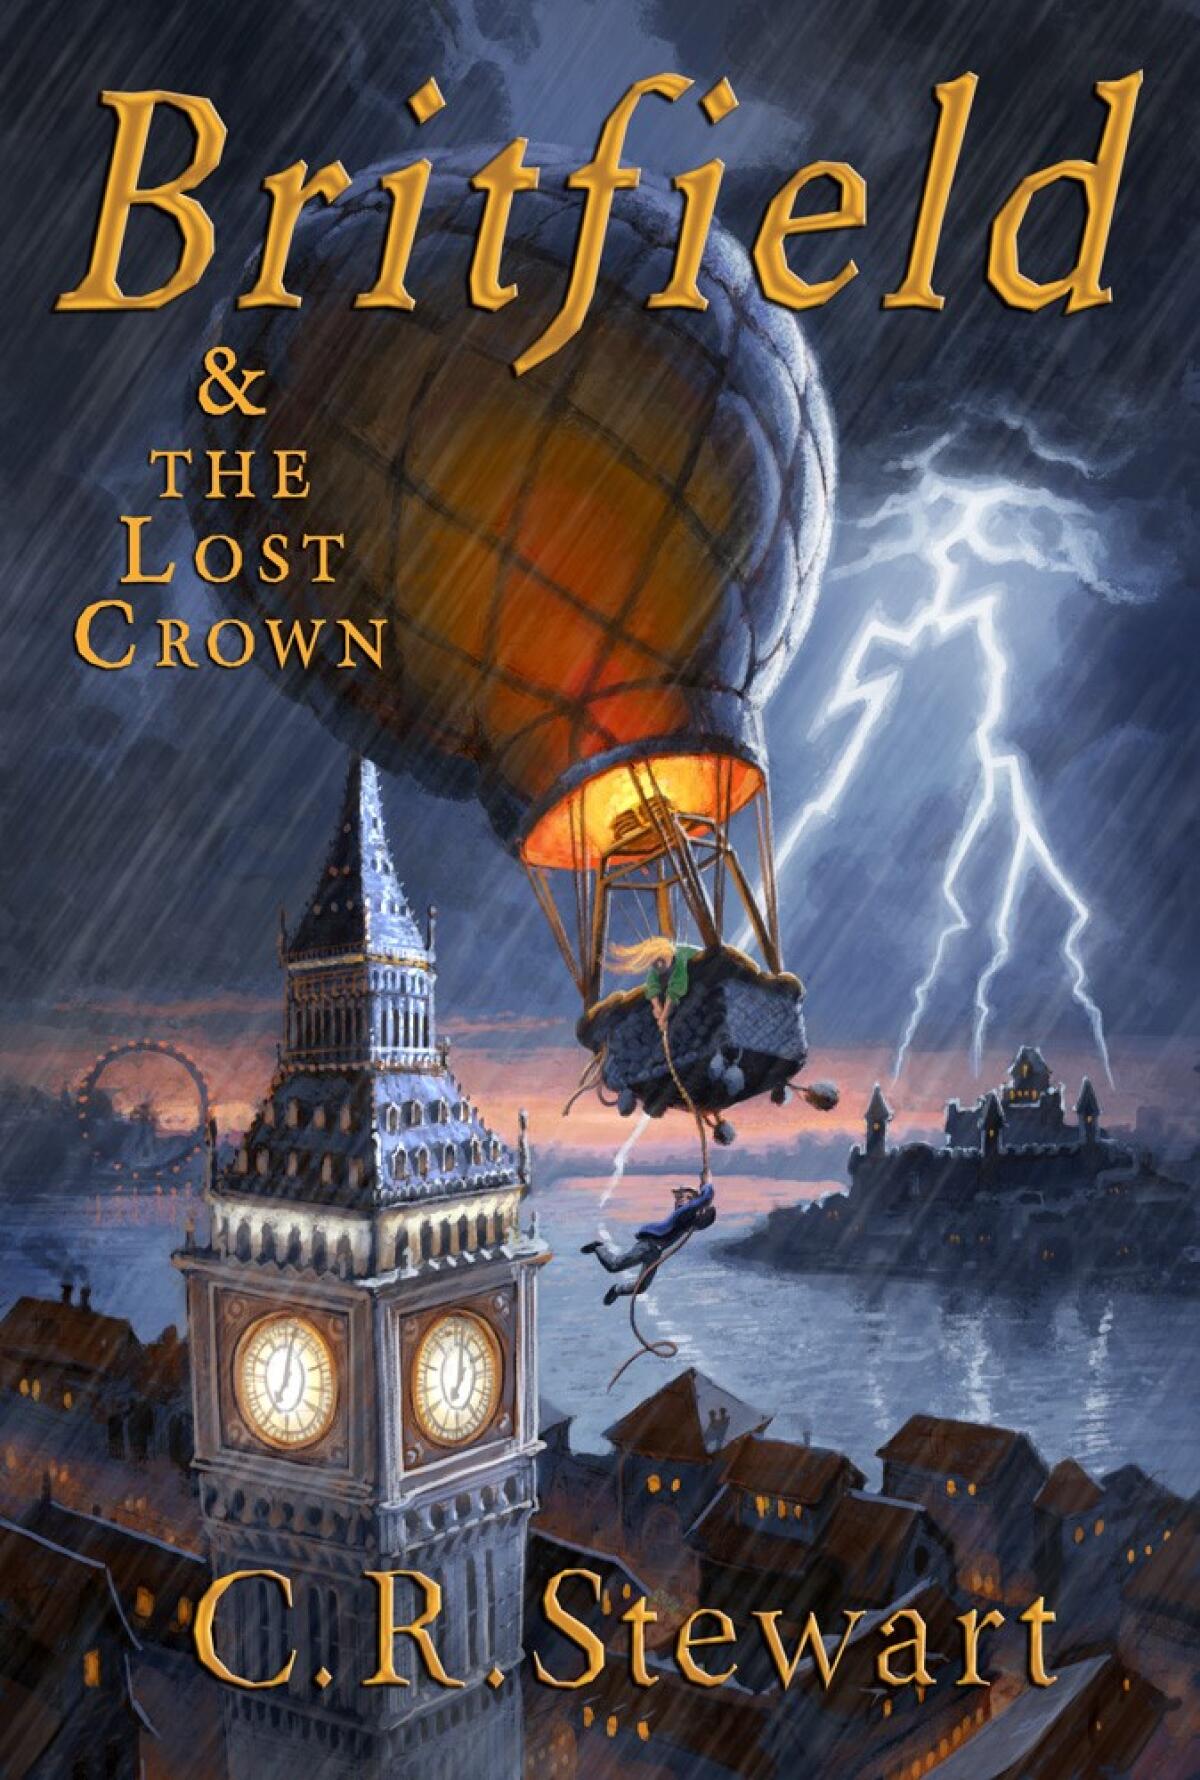 The cover of "Britfield & The Lost Crown"